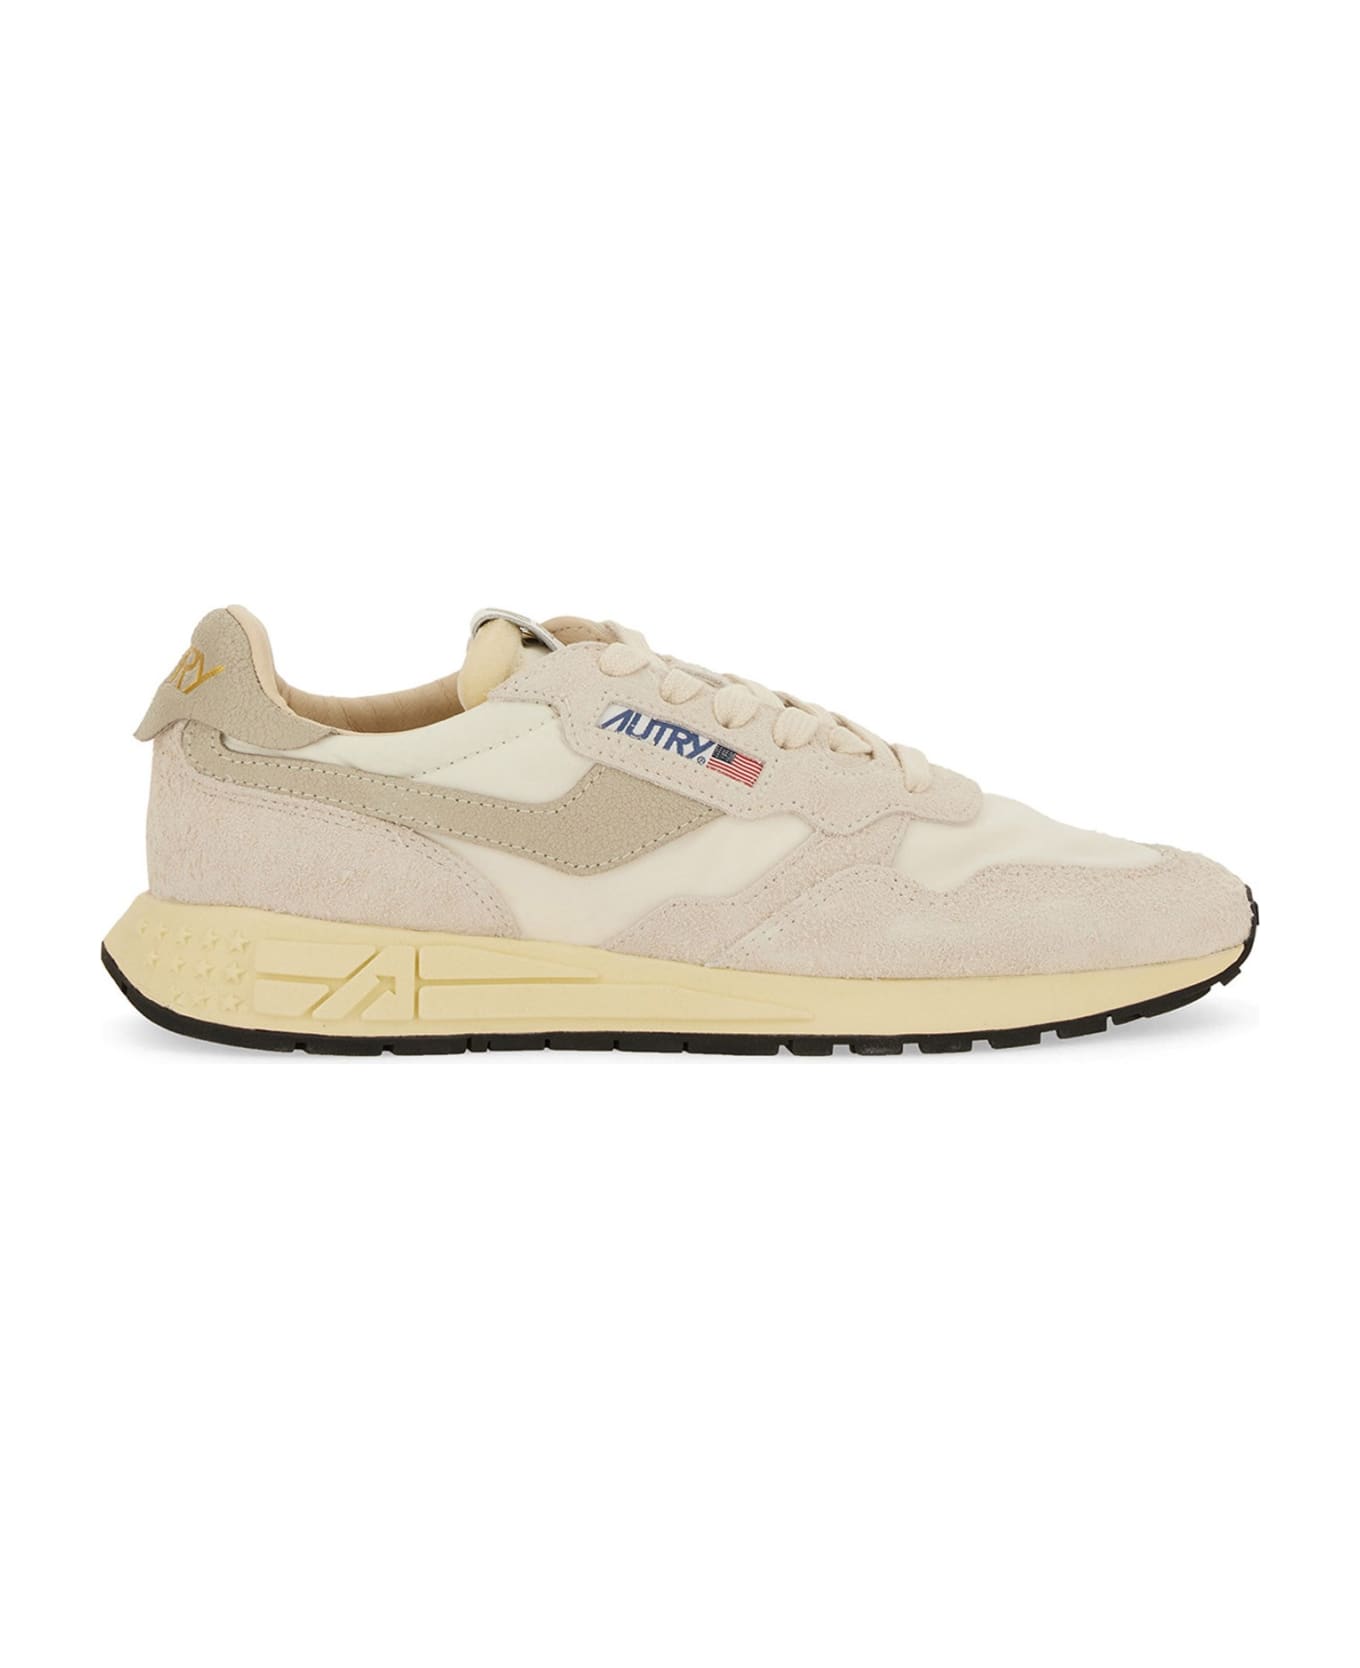 Autry Reelwind - Suede And Technical Textile Trainer - White スニーカー